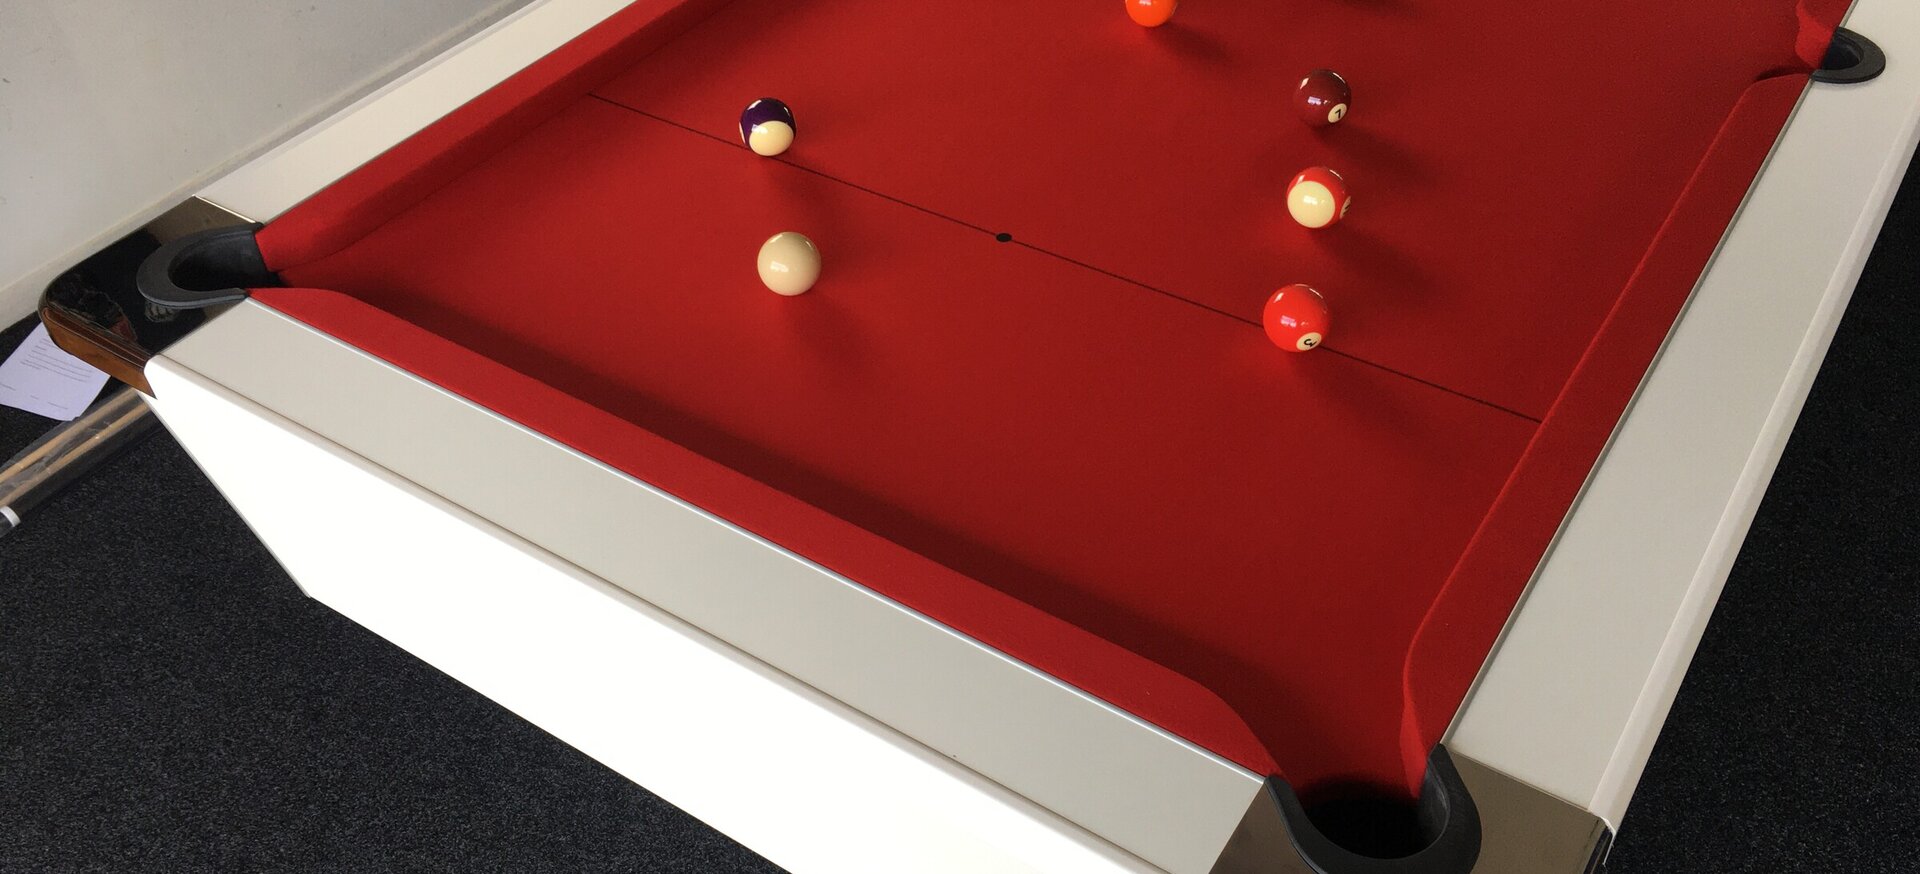 My Pool Table Snooker Scoreboard, Table Accessories